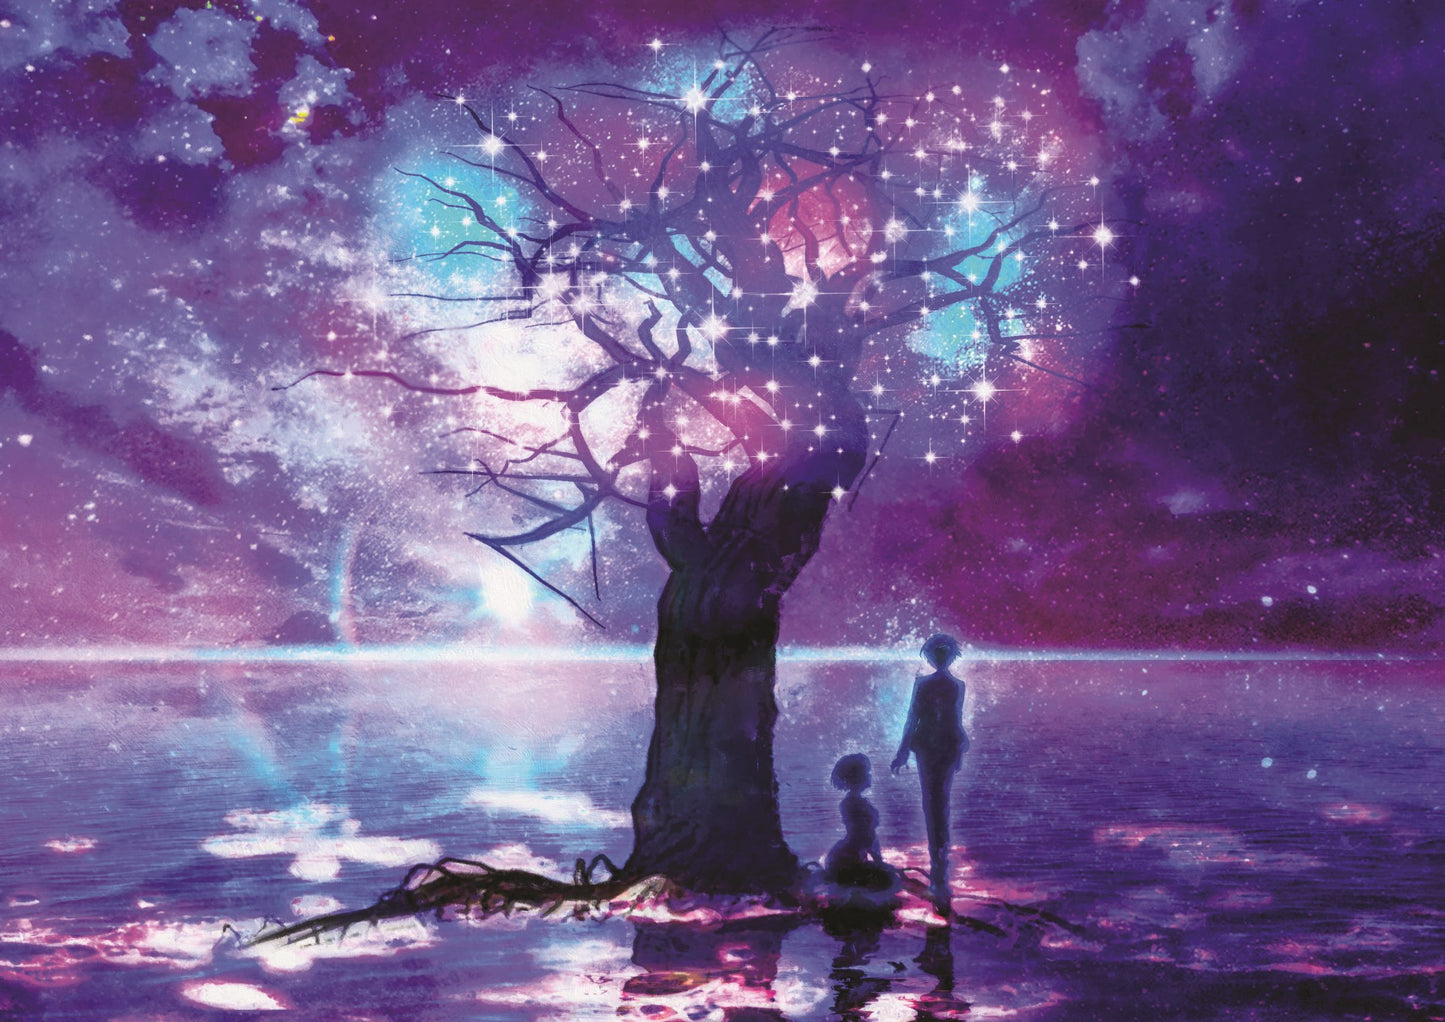 A magic tree made of stars in the middle of the sea, with a starry night sky, a boy and a girl